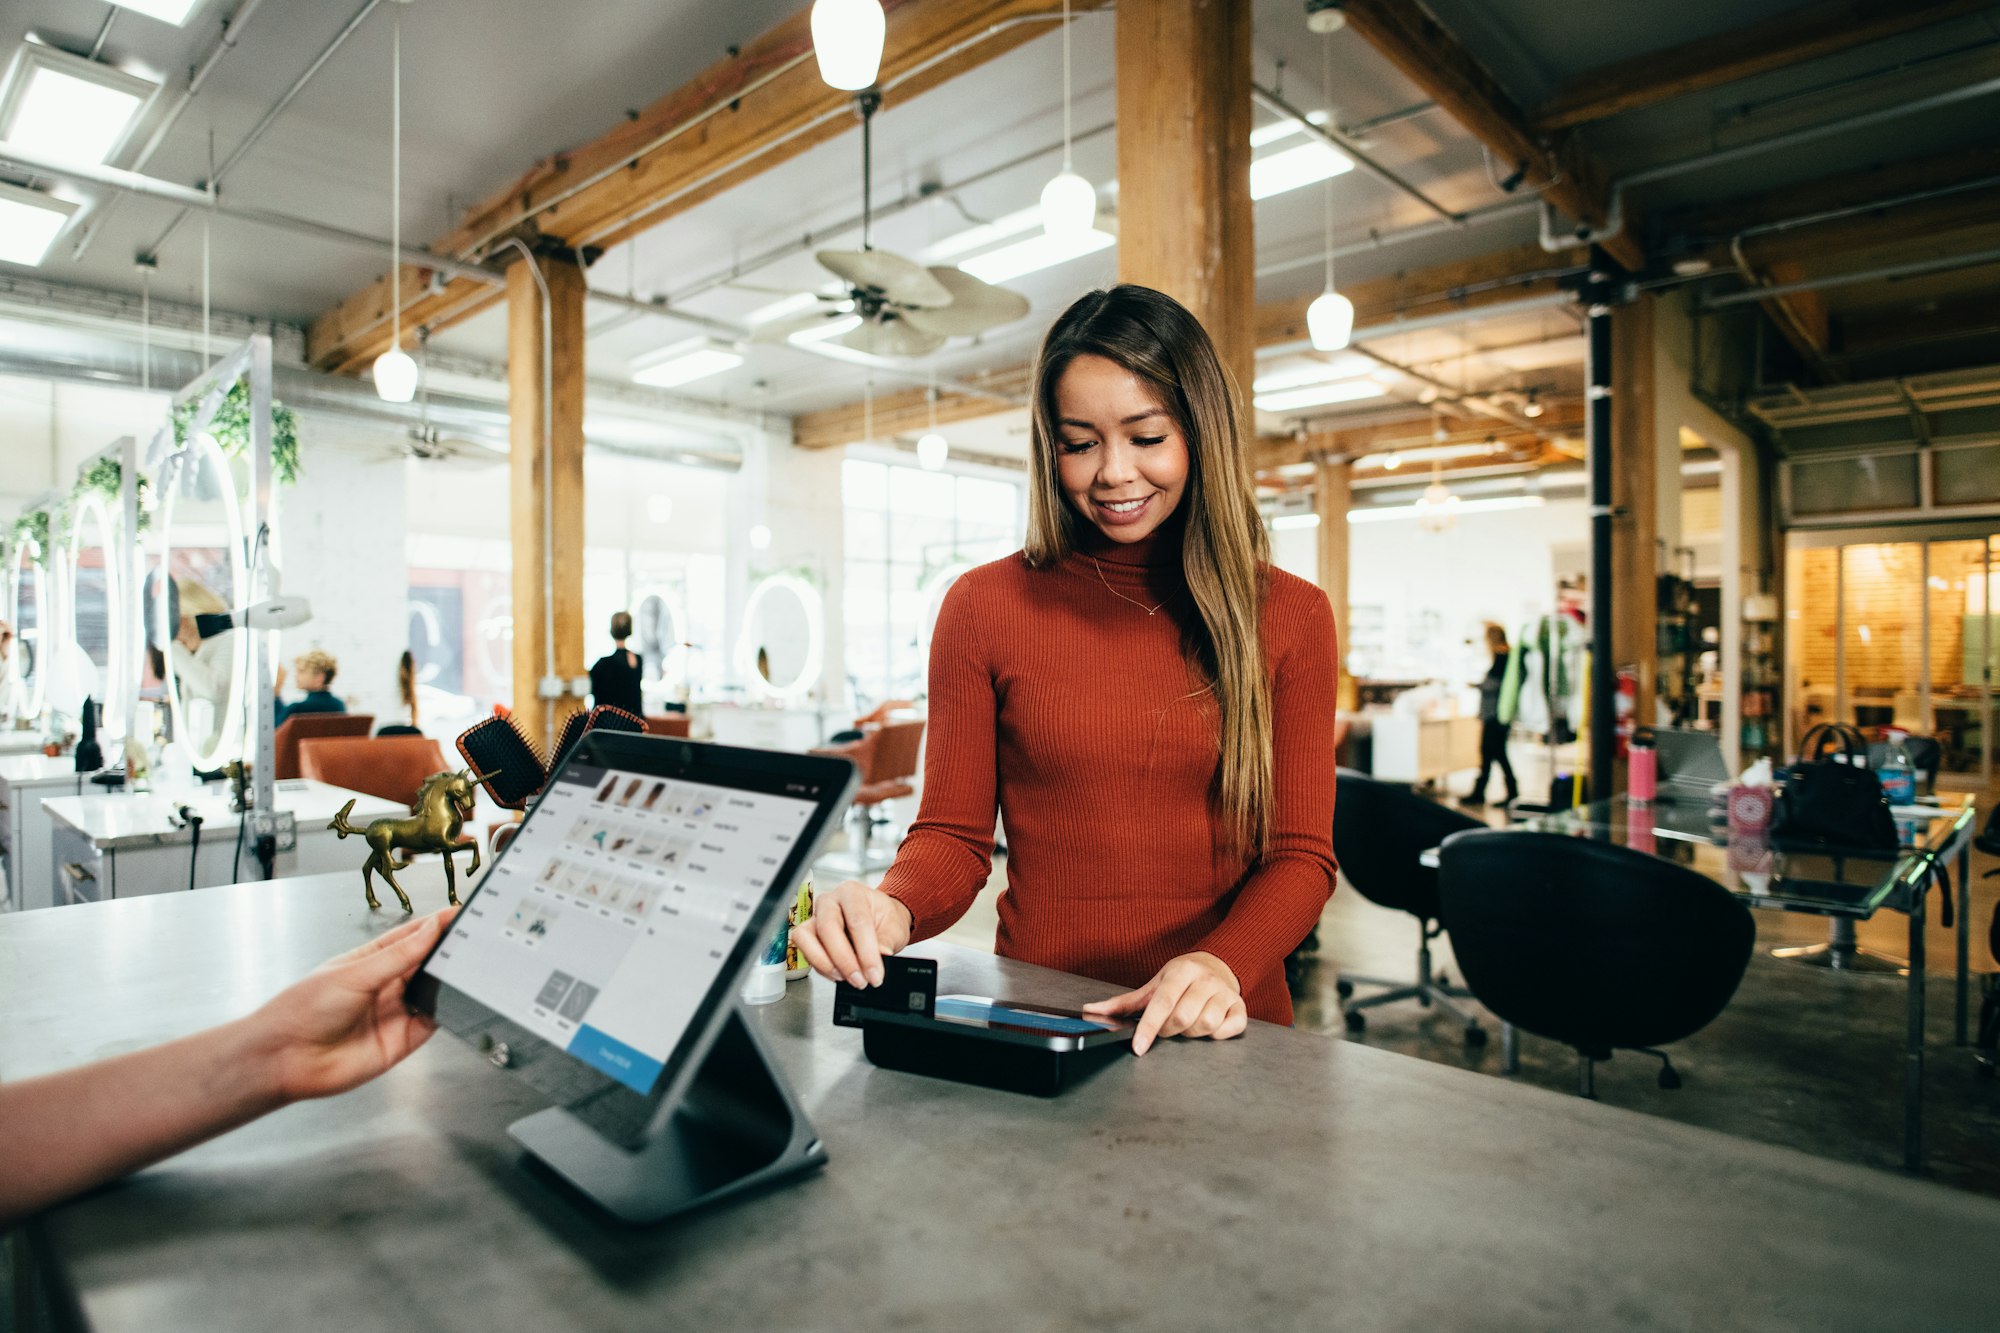 Image of woman paying for something with a debit card